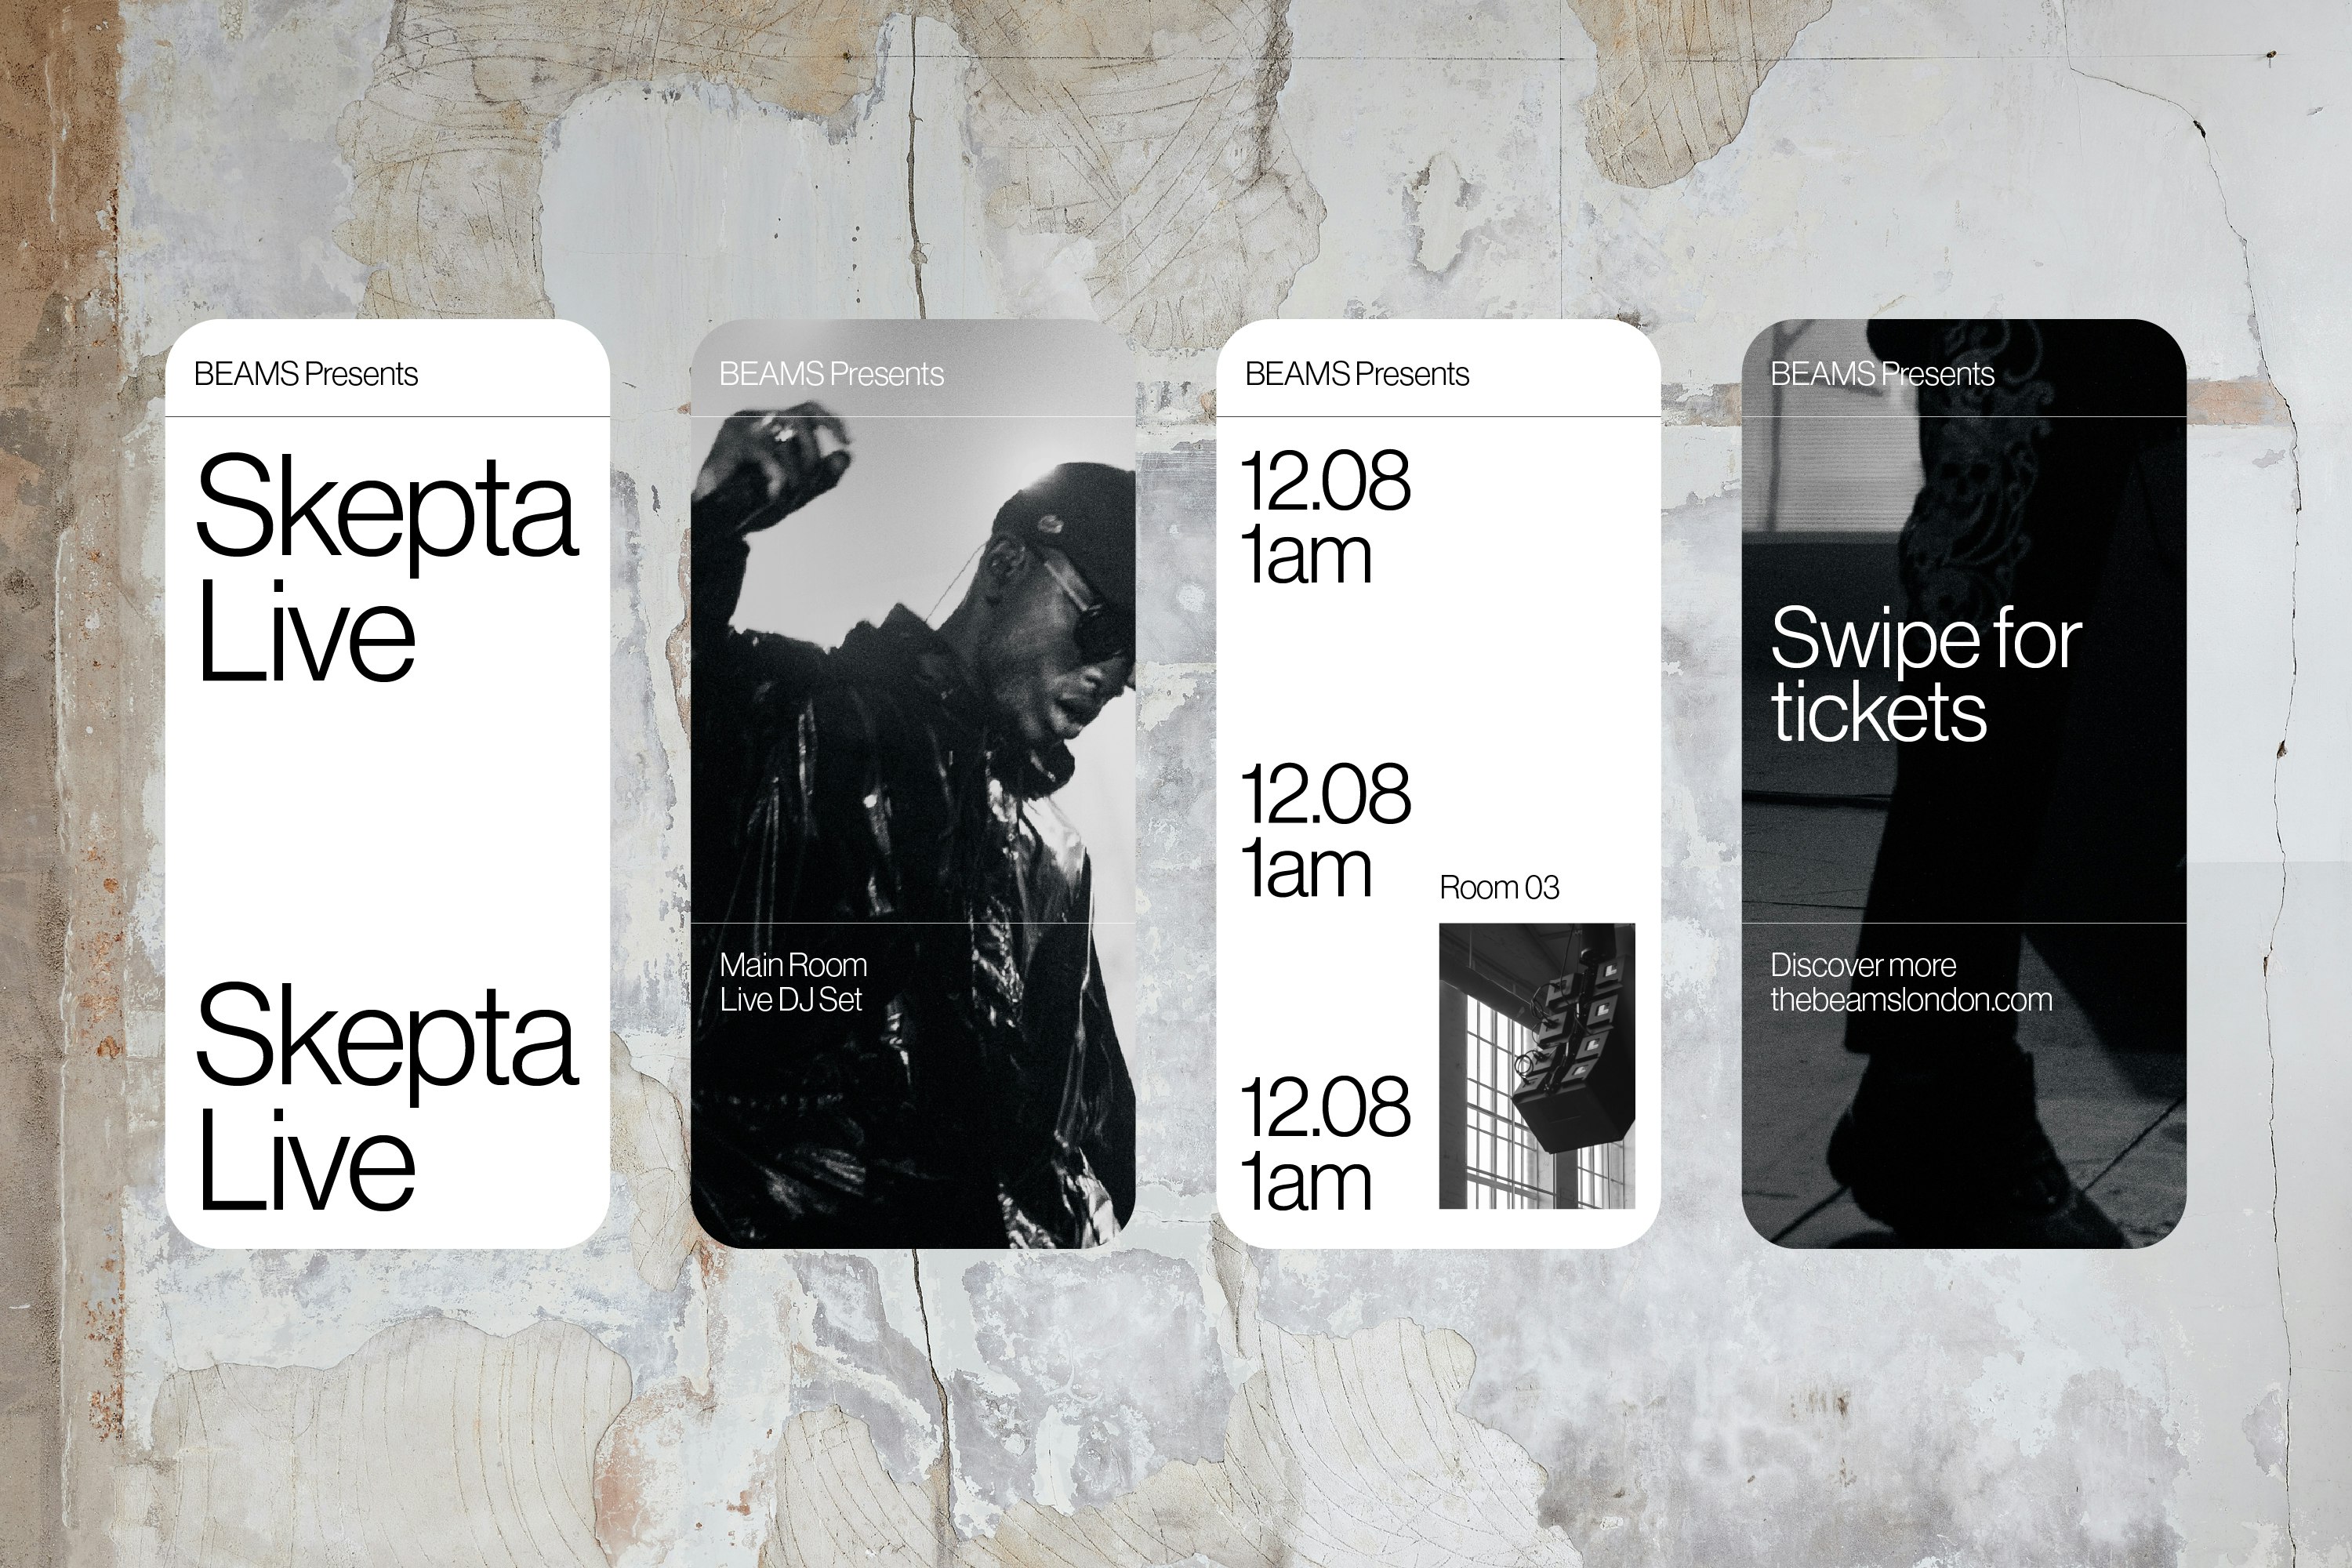 Designs for a mobile social media post advertising a Skepta event at the Beams.